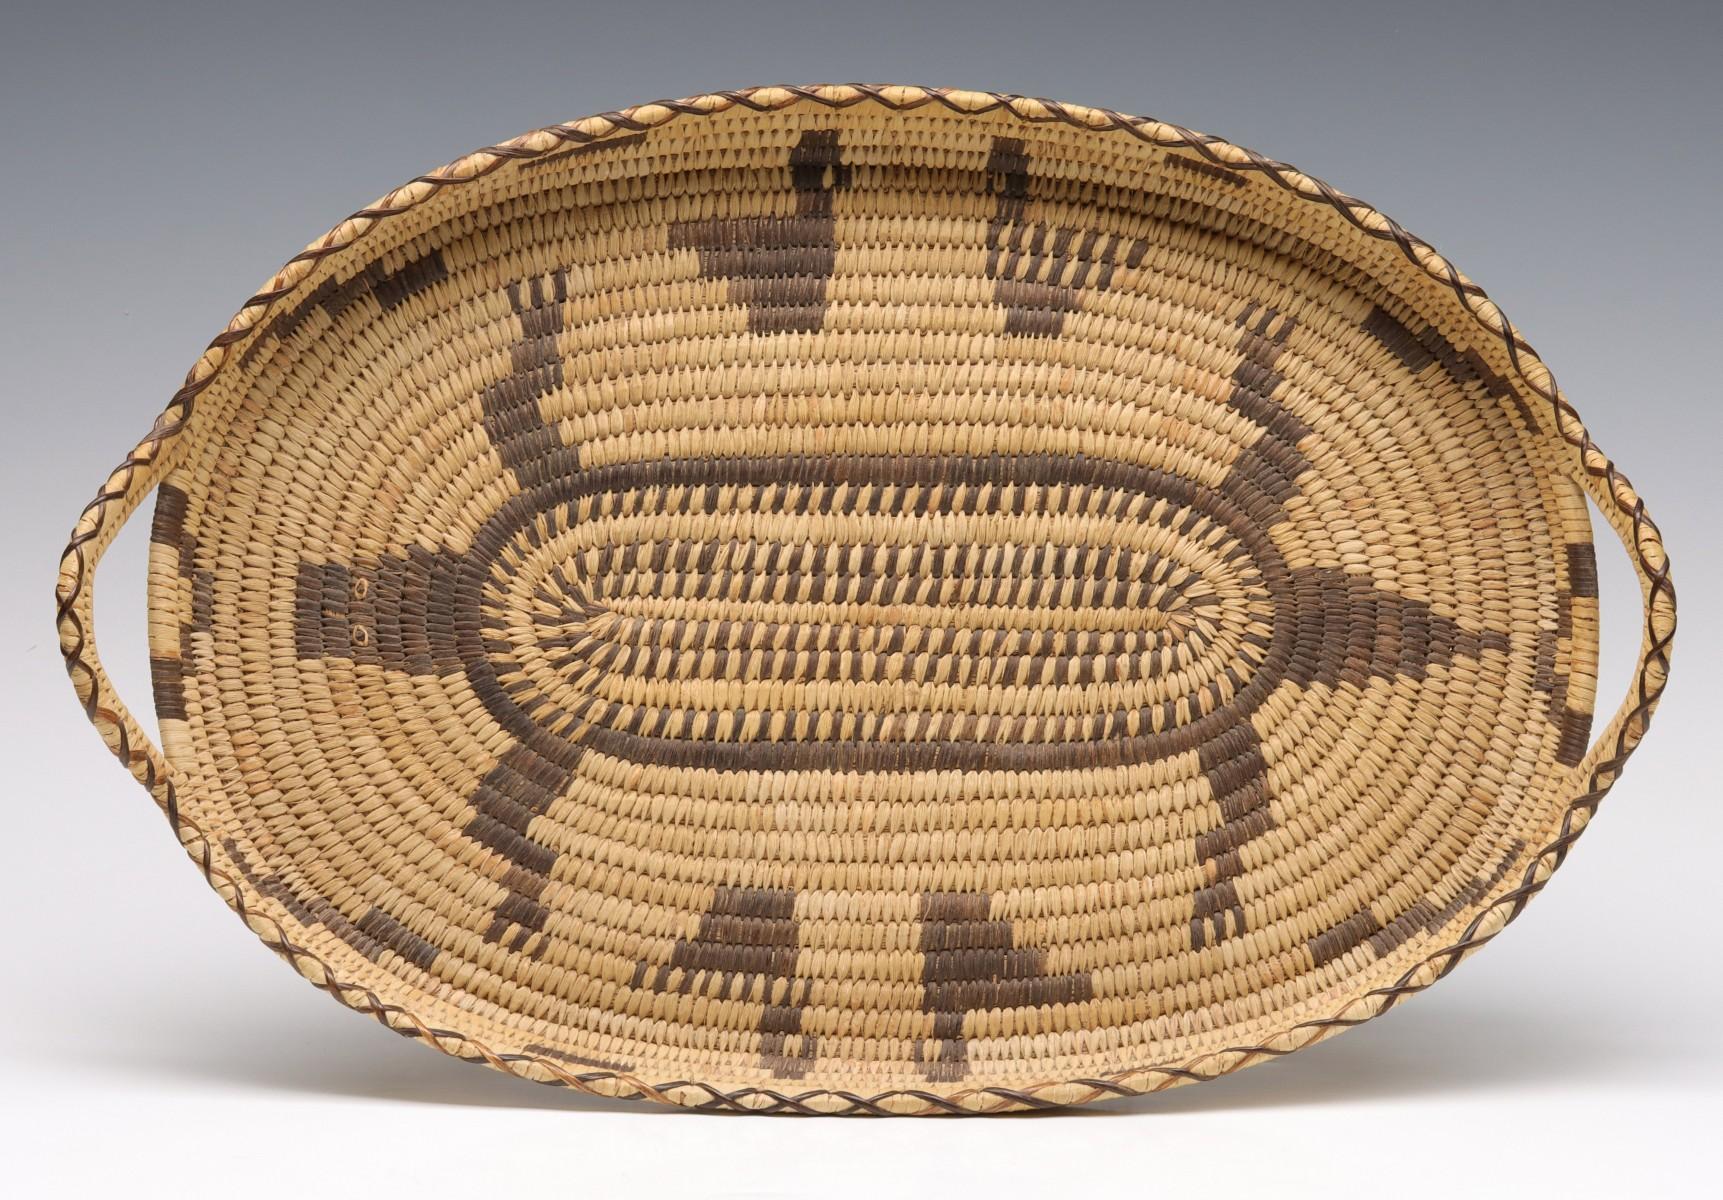 A GOOD PICTORIAL TOHONO O'ODHAM COILED BASKETRY TRAY